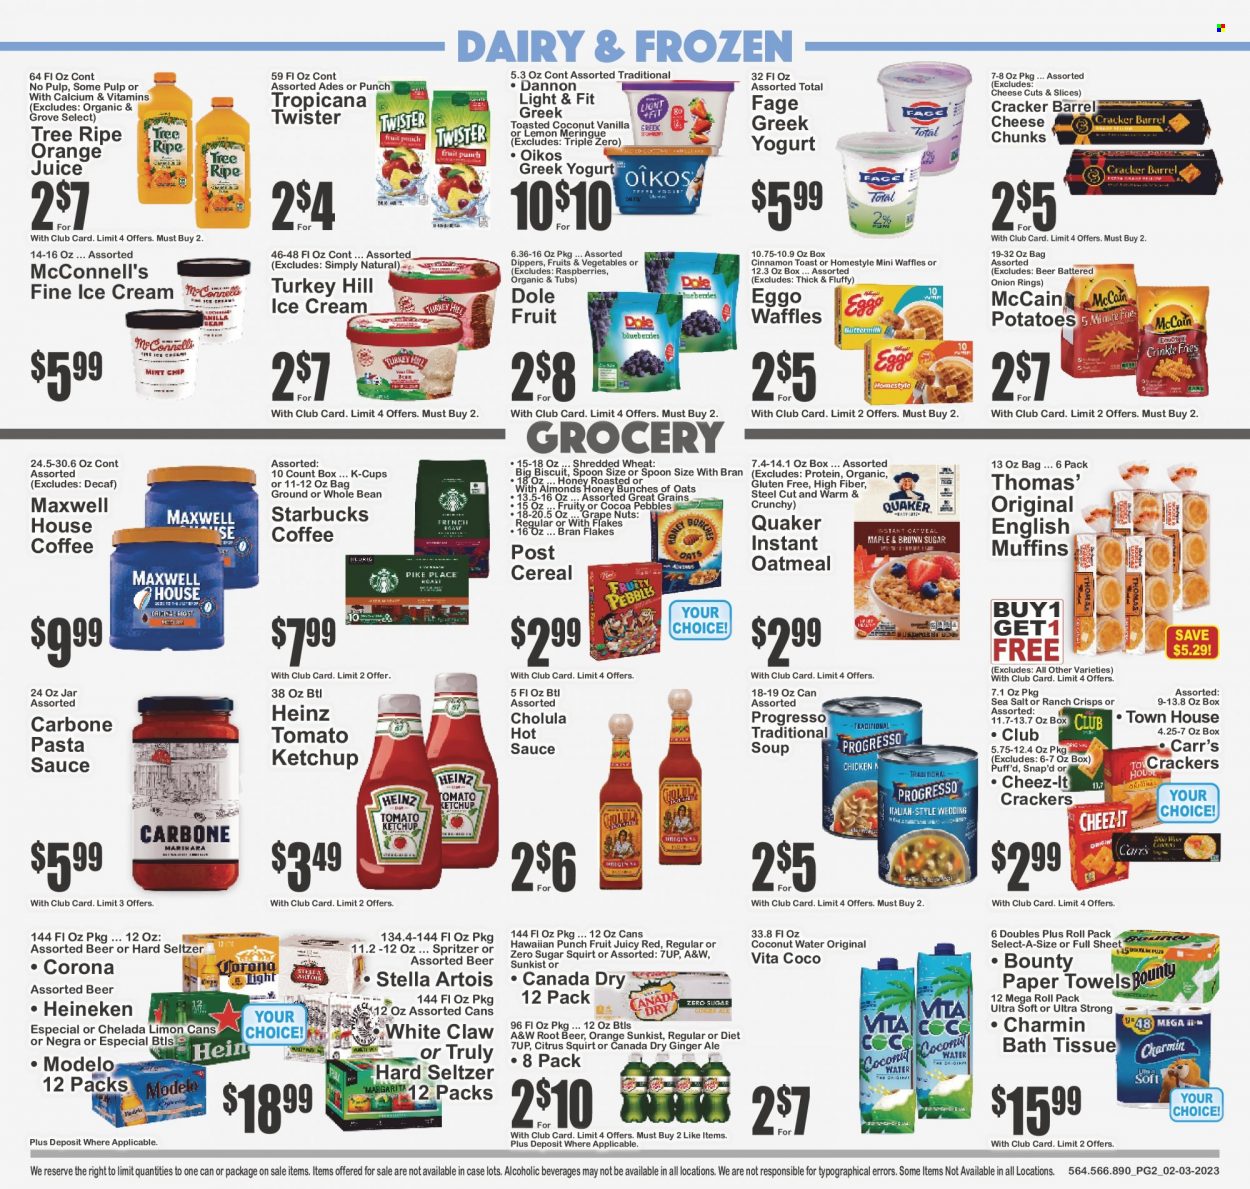 thumbnail - Key Food Flyer - 02/03/2023 - 02/09/2023 - Sales products - english muffins, waffles, potatoes, Dole, blueberries, pasta sauce, onion rings, soup, sauce, Quaker, Progresso, cheese, greek yoghurt, yoghurt, Oikos, Dannon, ice cream, McCain, potato fries, crinkle fries, Bounty, crackers, biscuit, Cheez-It, oatmeal, Heinz, cereals, bran flakes, Fruity Pebbles, cinnamon, hot sauce, ketchup, Canada Dry, ginger ale, orange juice, juice, coconut water, 7UP, A&W, Tropicana Twister, Maxwell House, coffee, Starbucks, coffee capsules, K-Cups, White Claw, Hard Seltzer, TRULY, beer, Stella Artois, Corona Extra, Heineken, Modelo, bath tissue, kitchen towels, paper towels, Charmin, spoon, calcium. Page 2.